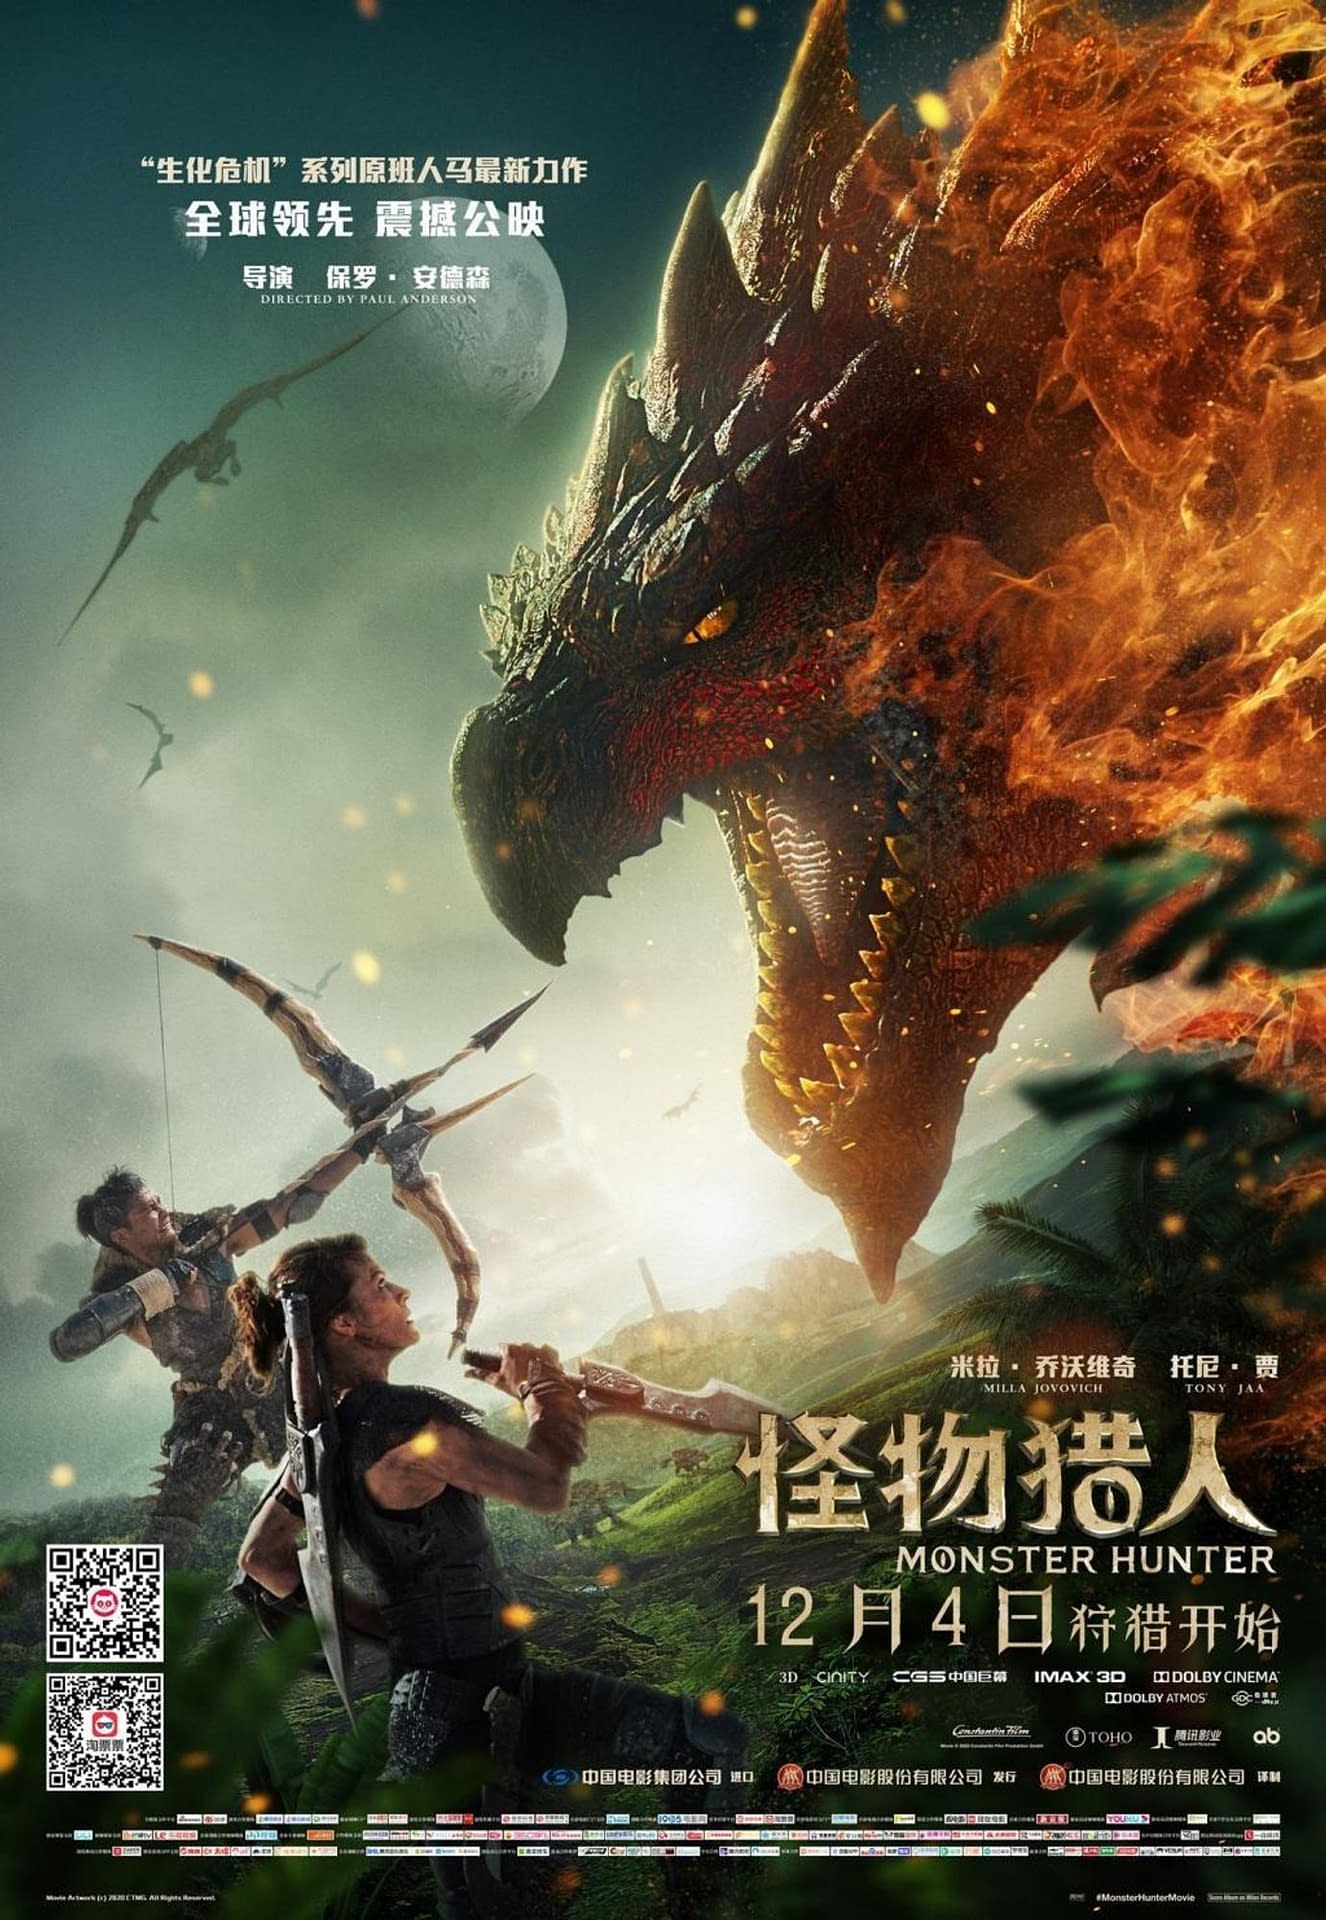 Review of Monster Hunt, the highest-grossing film in China's history.